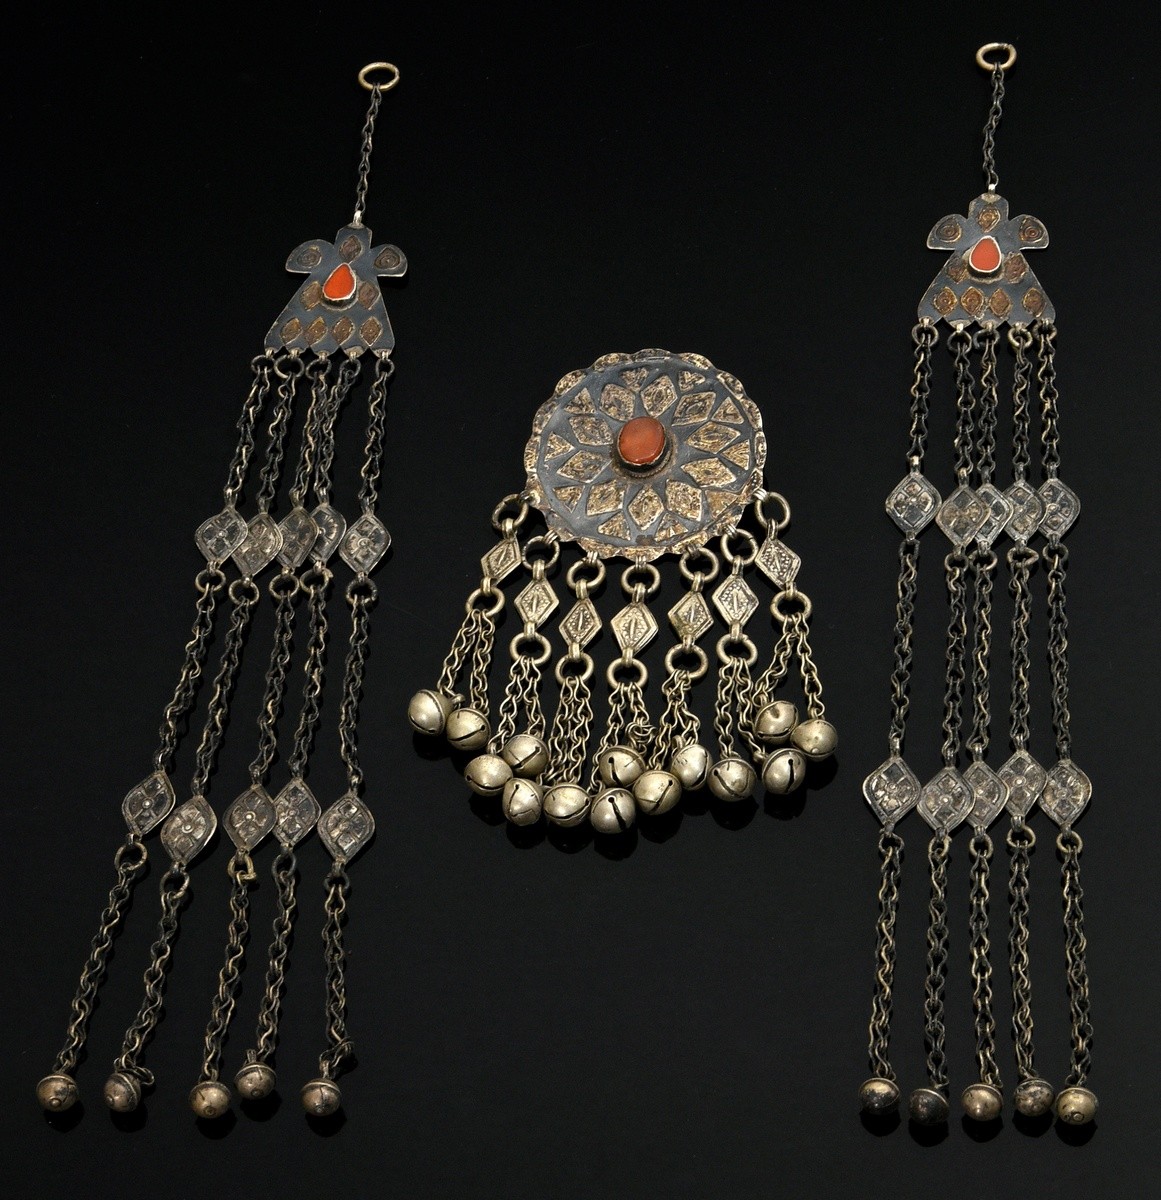 3 Pieces of Yomud Turkmen jewelry with bell ornaments: 2 braid or temple ornaments made of bird-sha